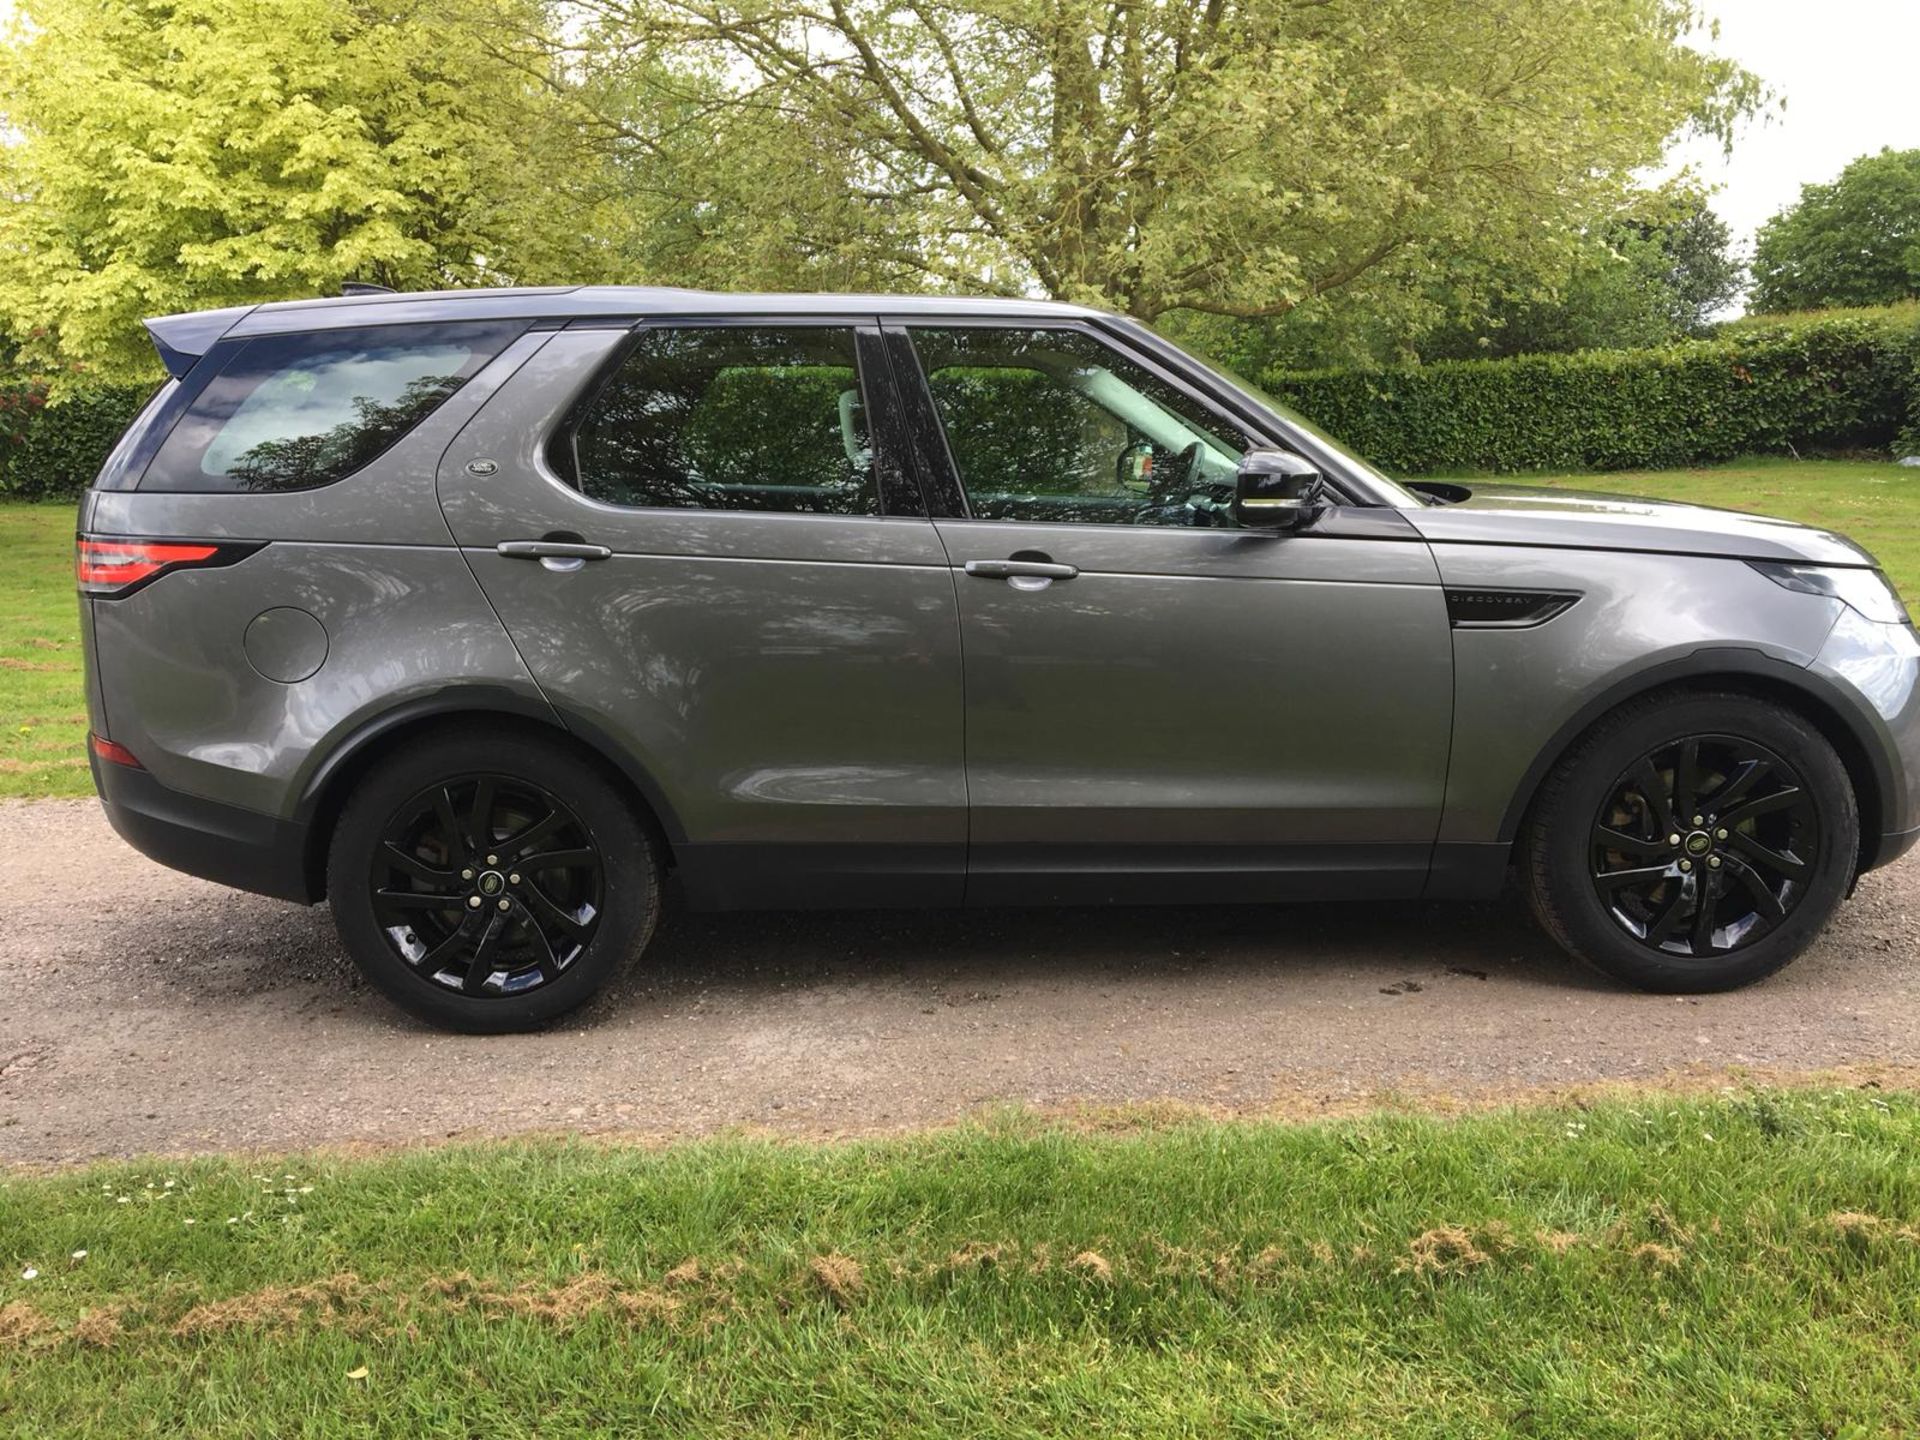 2017/17 REG LAND ROVER DISCOVERY HSE TD6 AUTO 3.0 DIESEL GREY, SHOWING 0 FORMER KEEPERS *NO VAT* - Image 8 of 23